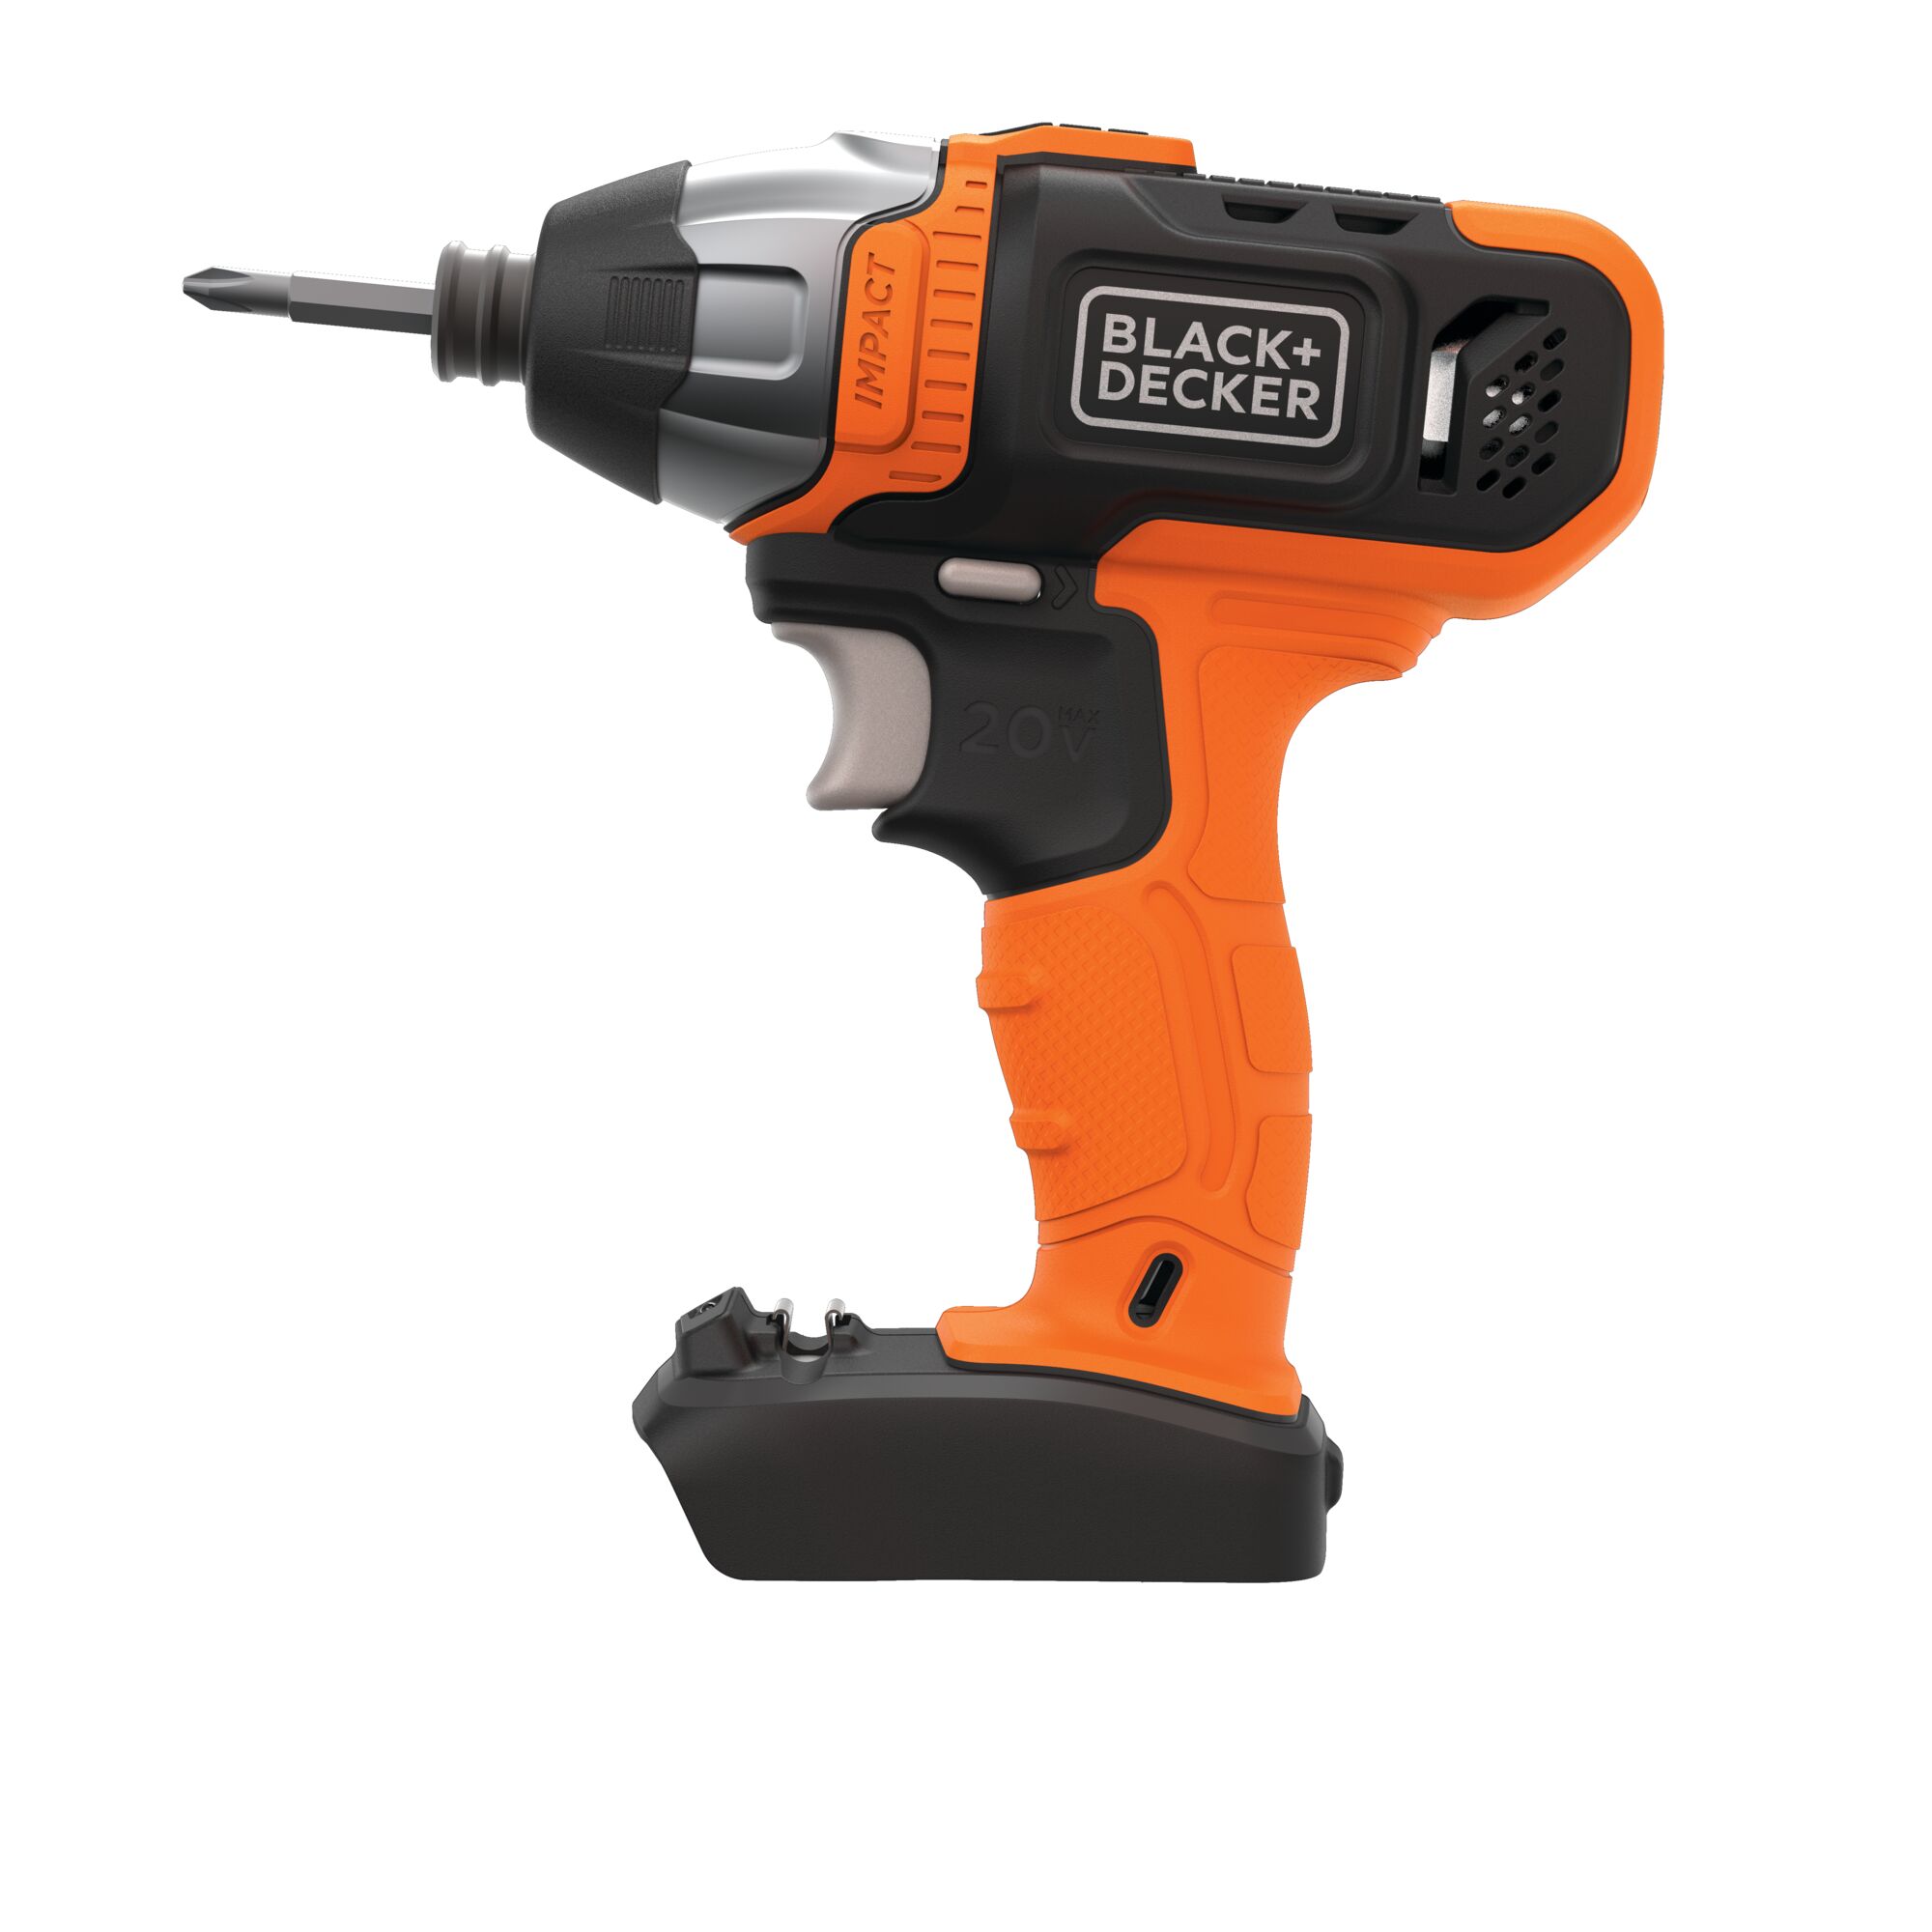 Lithium Ion Drill and Driver.